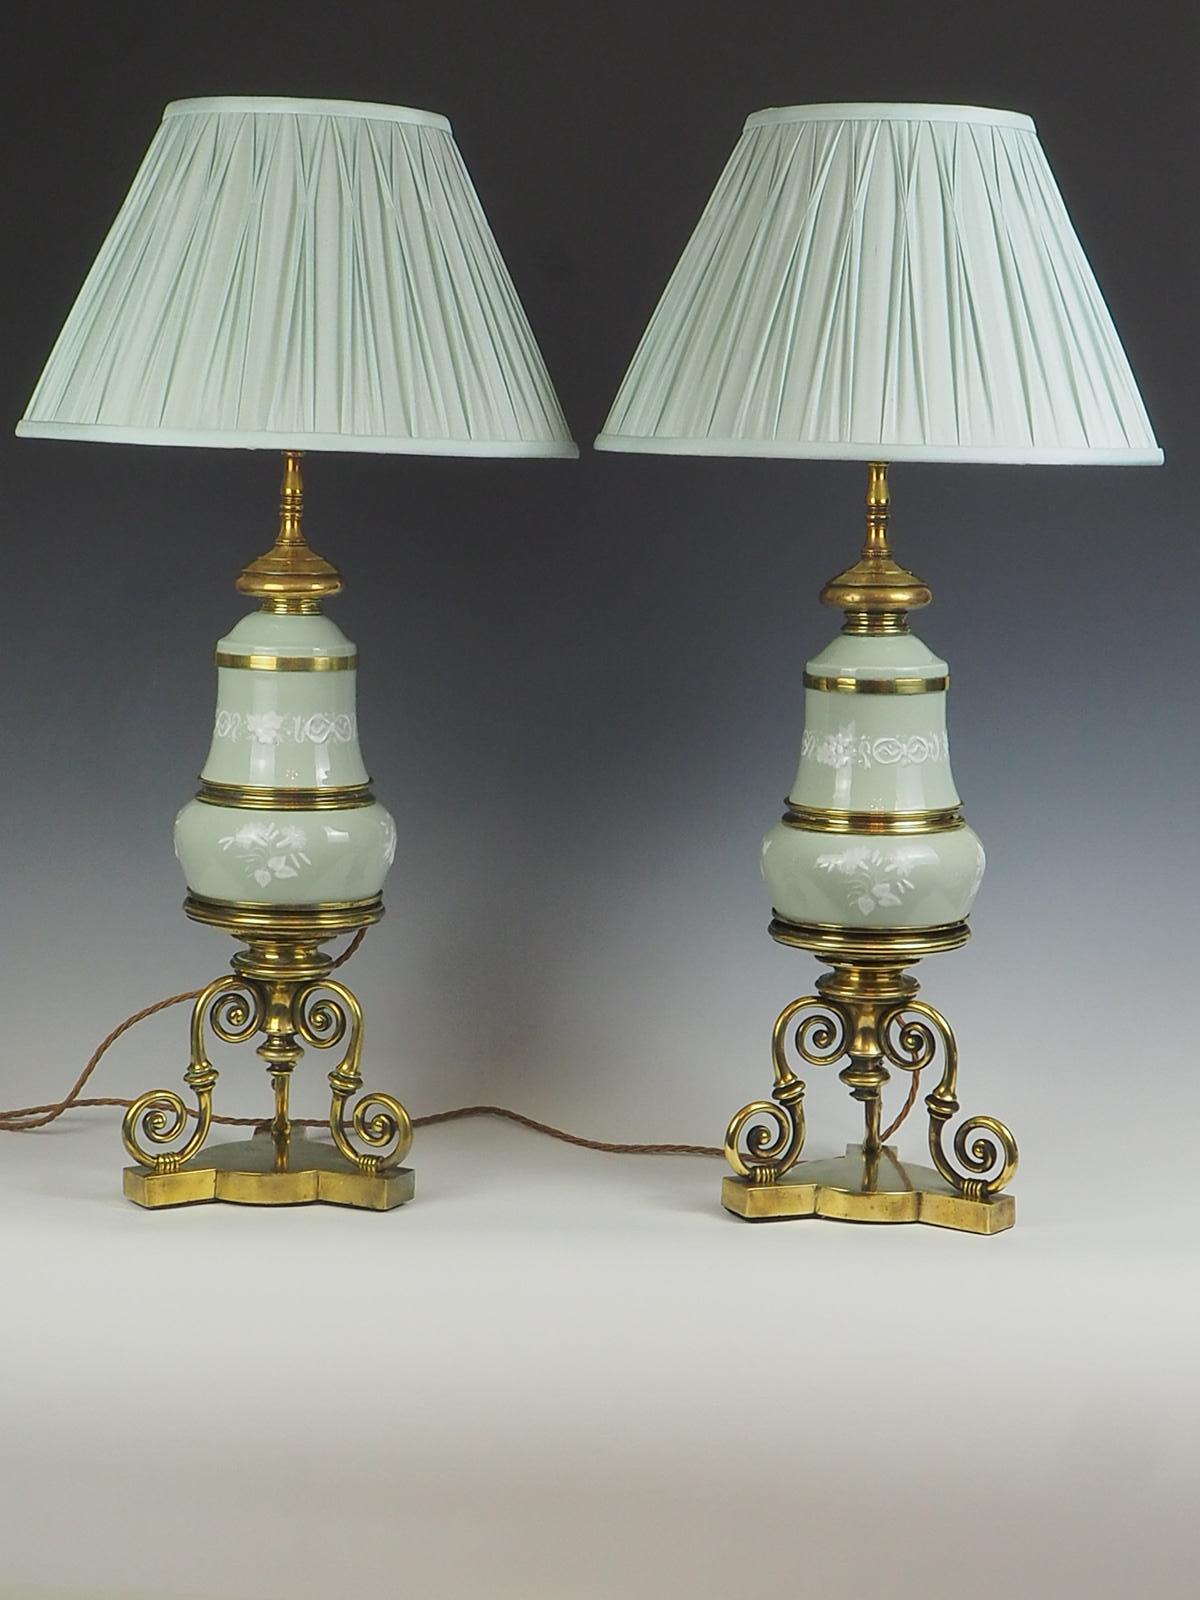 Pair of Celadon Porcelain Table Lamps is sure to captivate your guests with its exquisite design. Crafted with meticulous attention to detail, these lamps feature delicate white flowers and elegant ribbons on the porcelain, adding a touch of grace